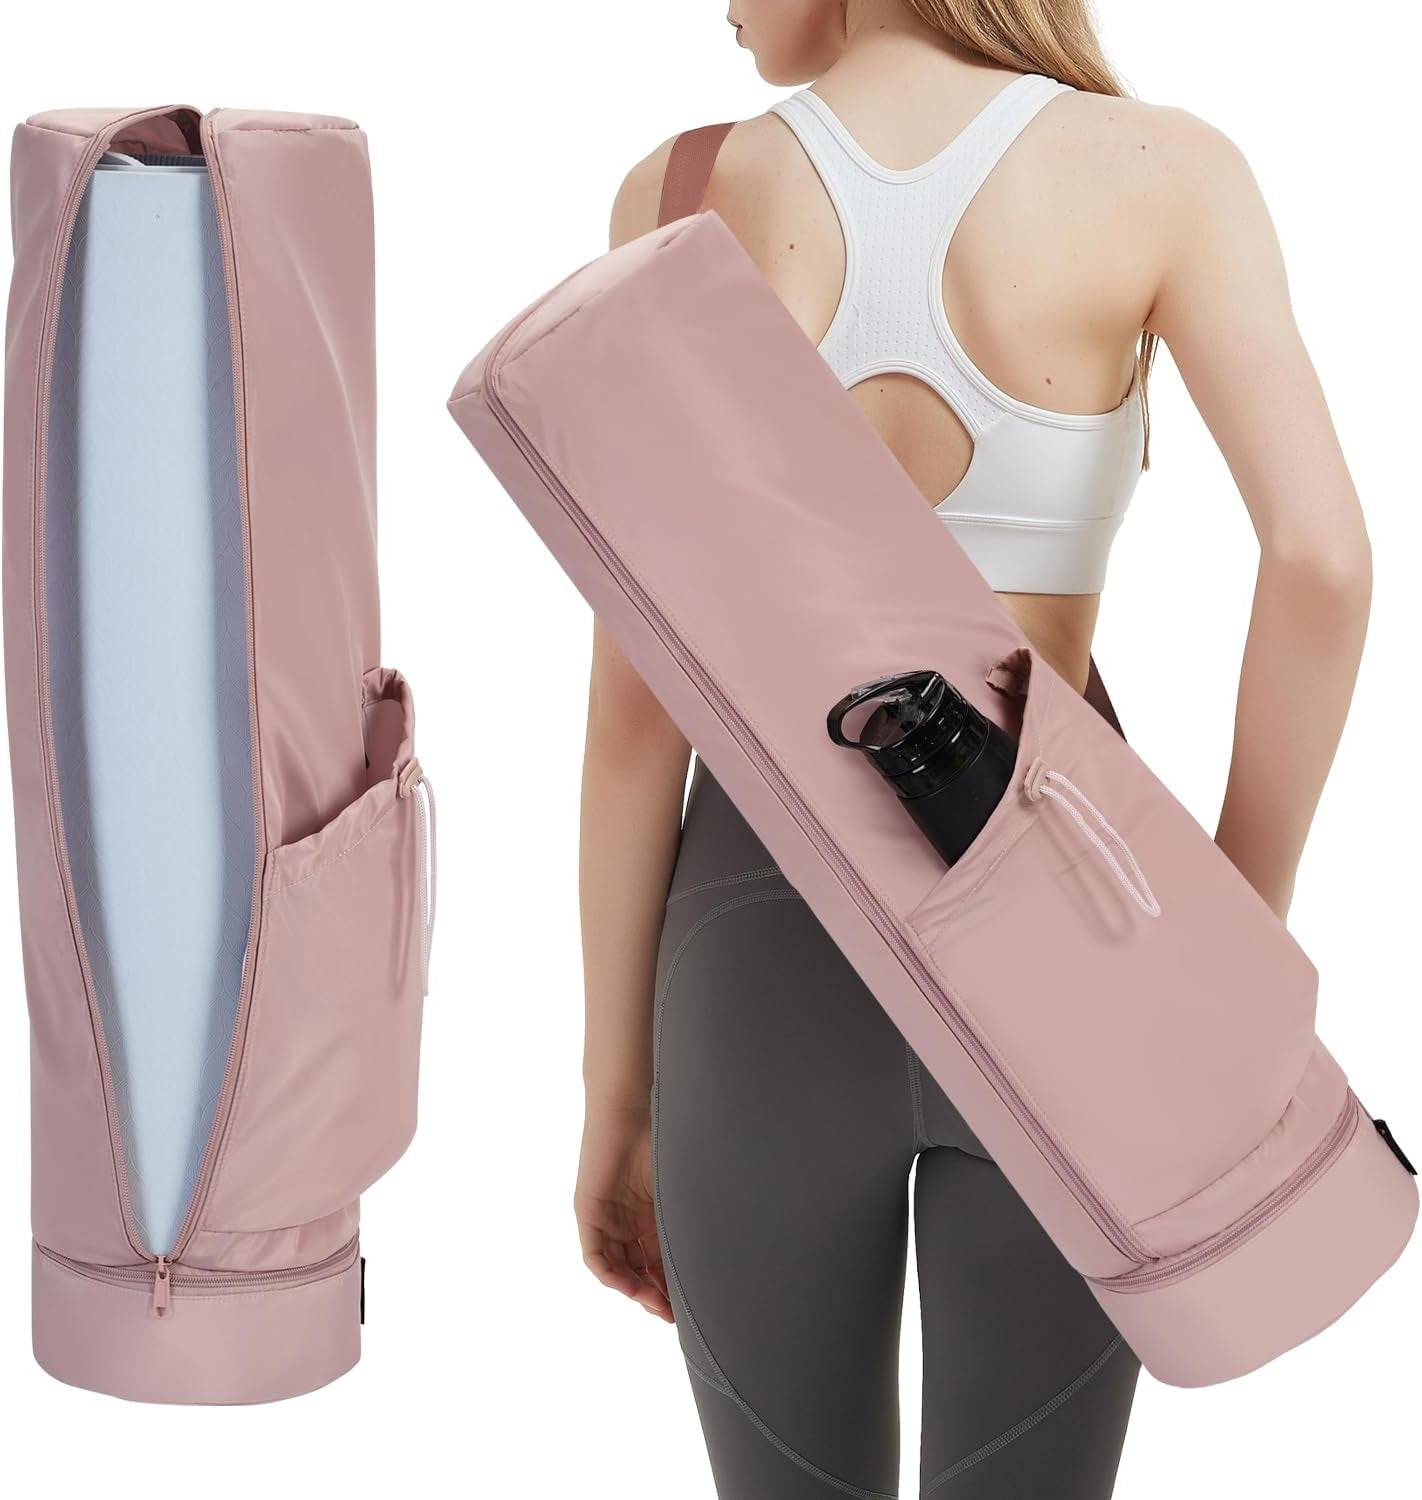 Yoga Mat Bag Large with Carrying Strap, Bottle Pocket and Wet Compartment, Long Pilates Bag with Full Zipper for Thick Mat, Patent Pending